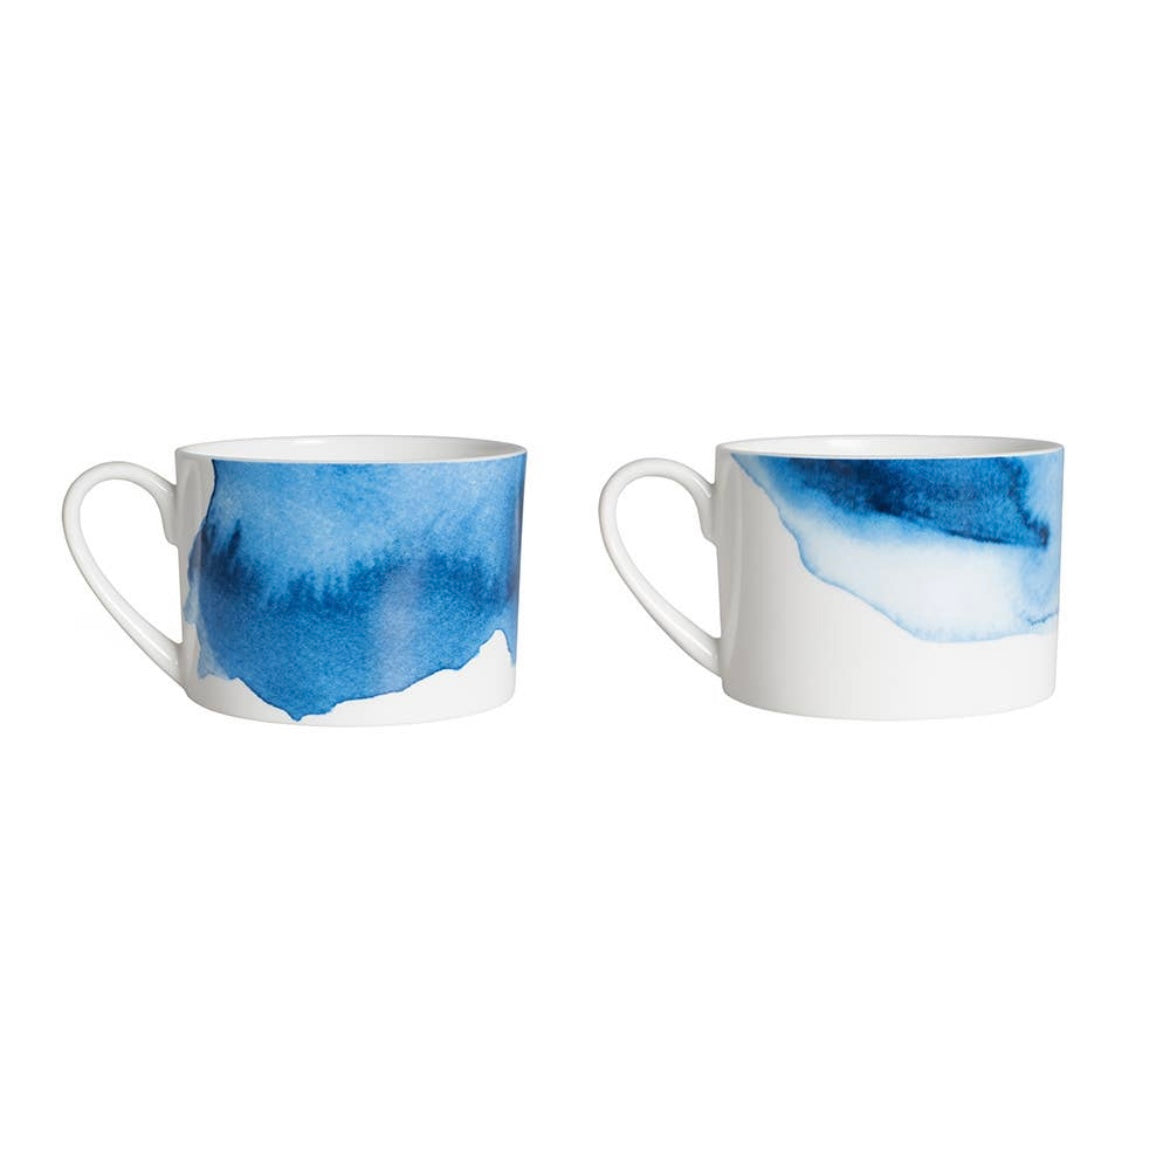 Rick Stein ‘Coves’ Set of 2 Cups